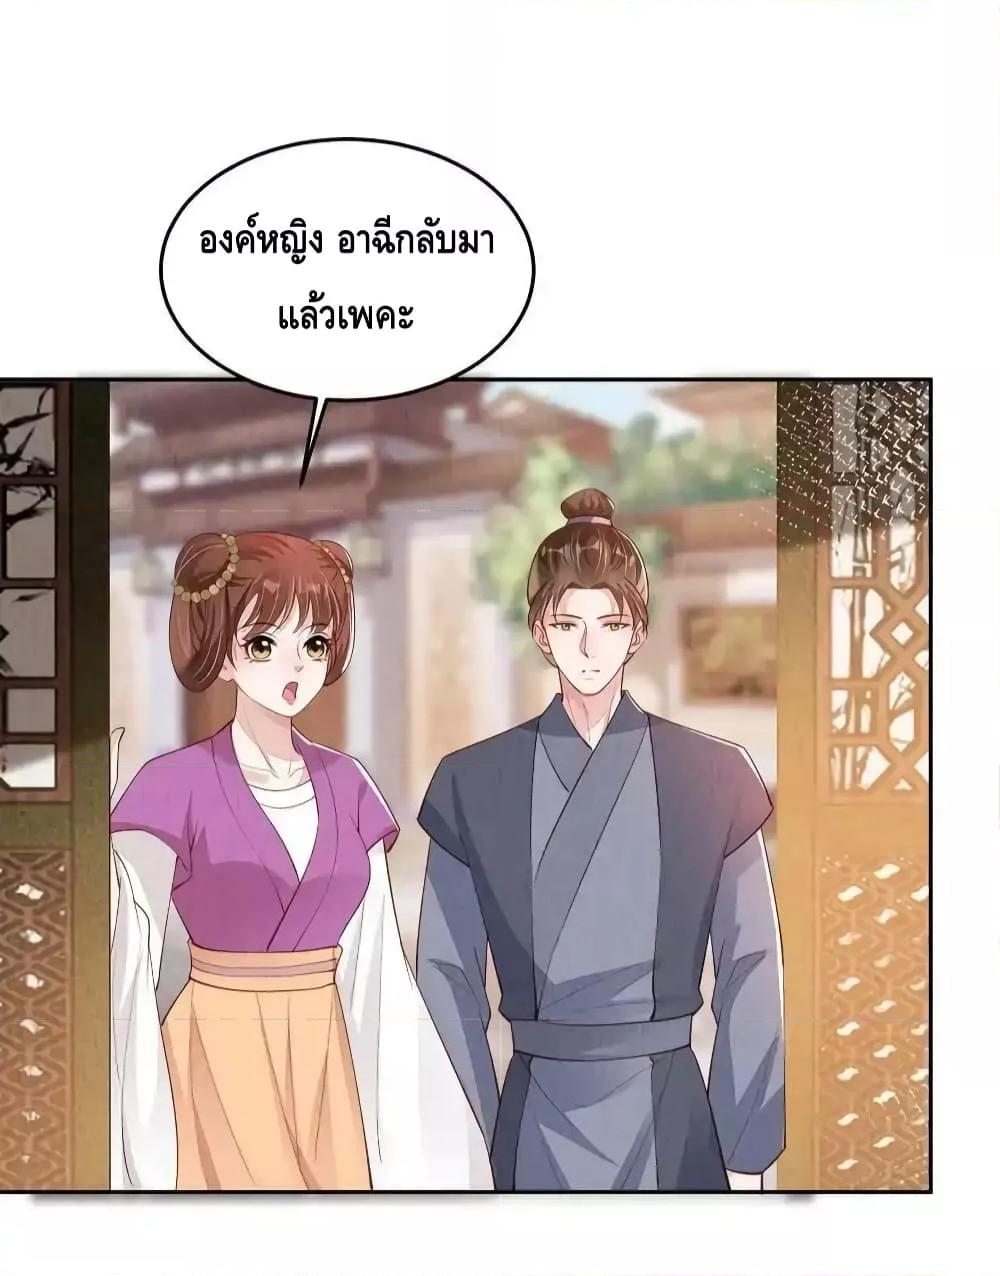 After I Bloom, a Hundred Flowers ตอนที่ 80 (24)